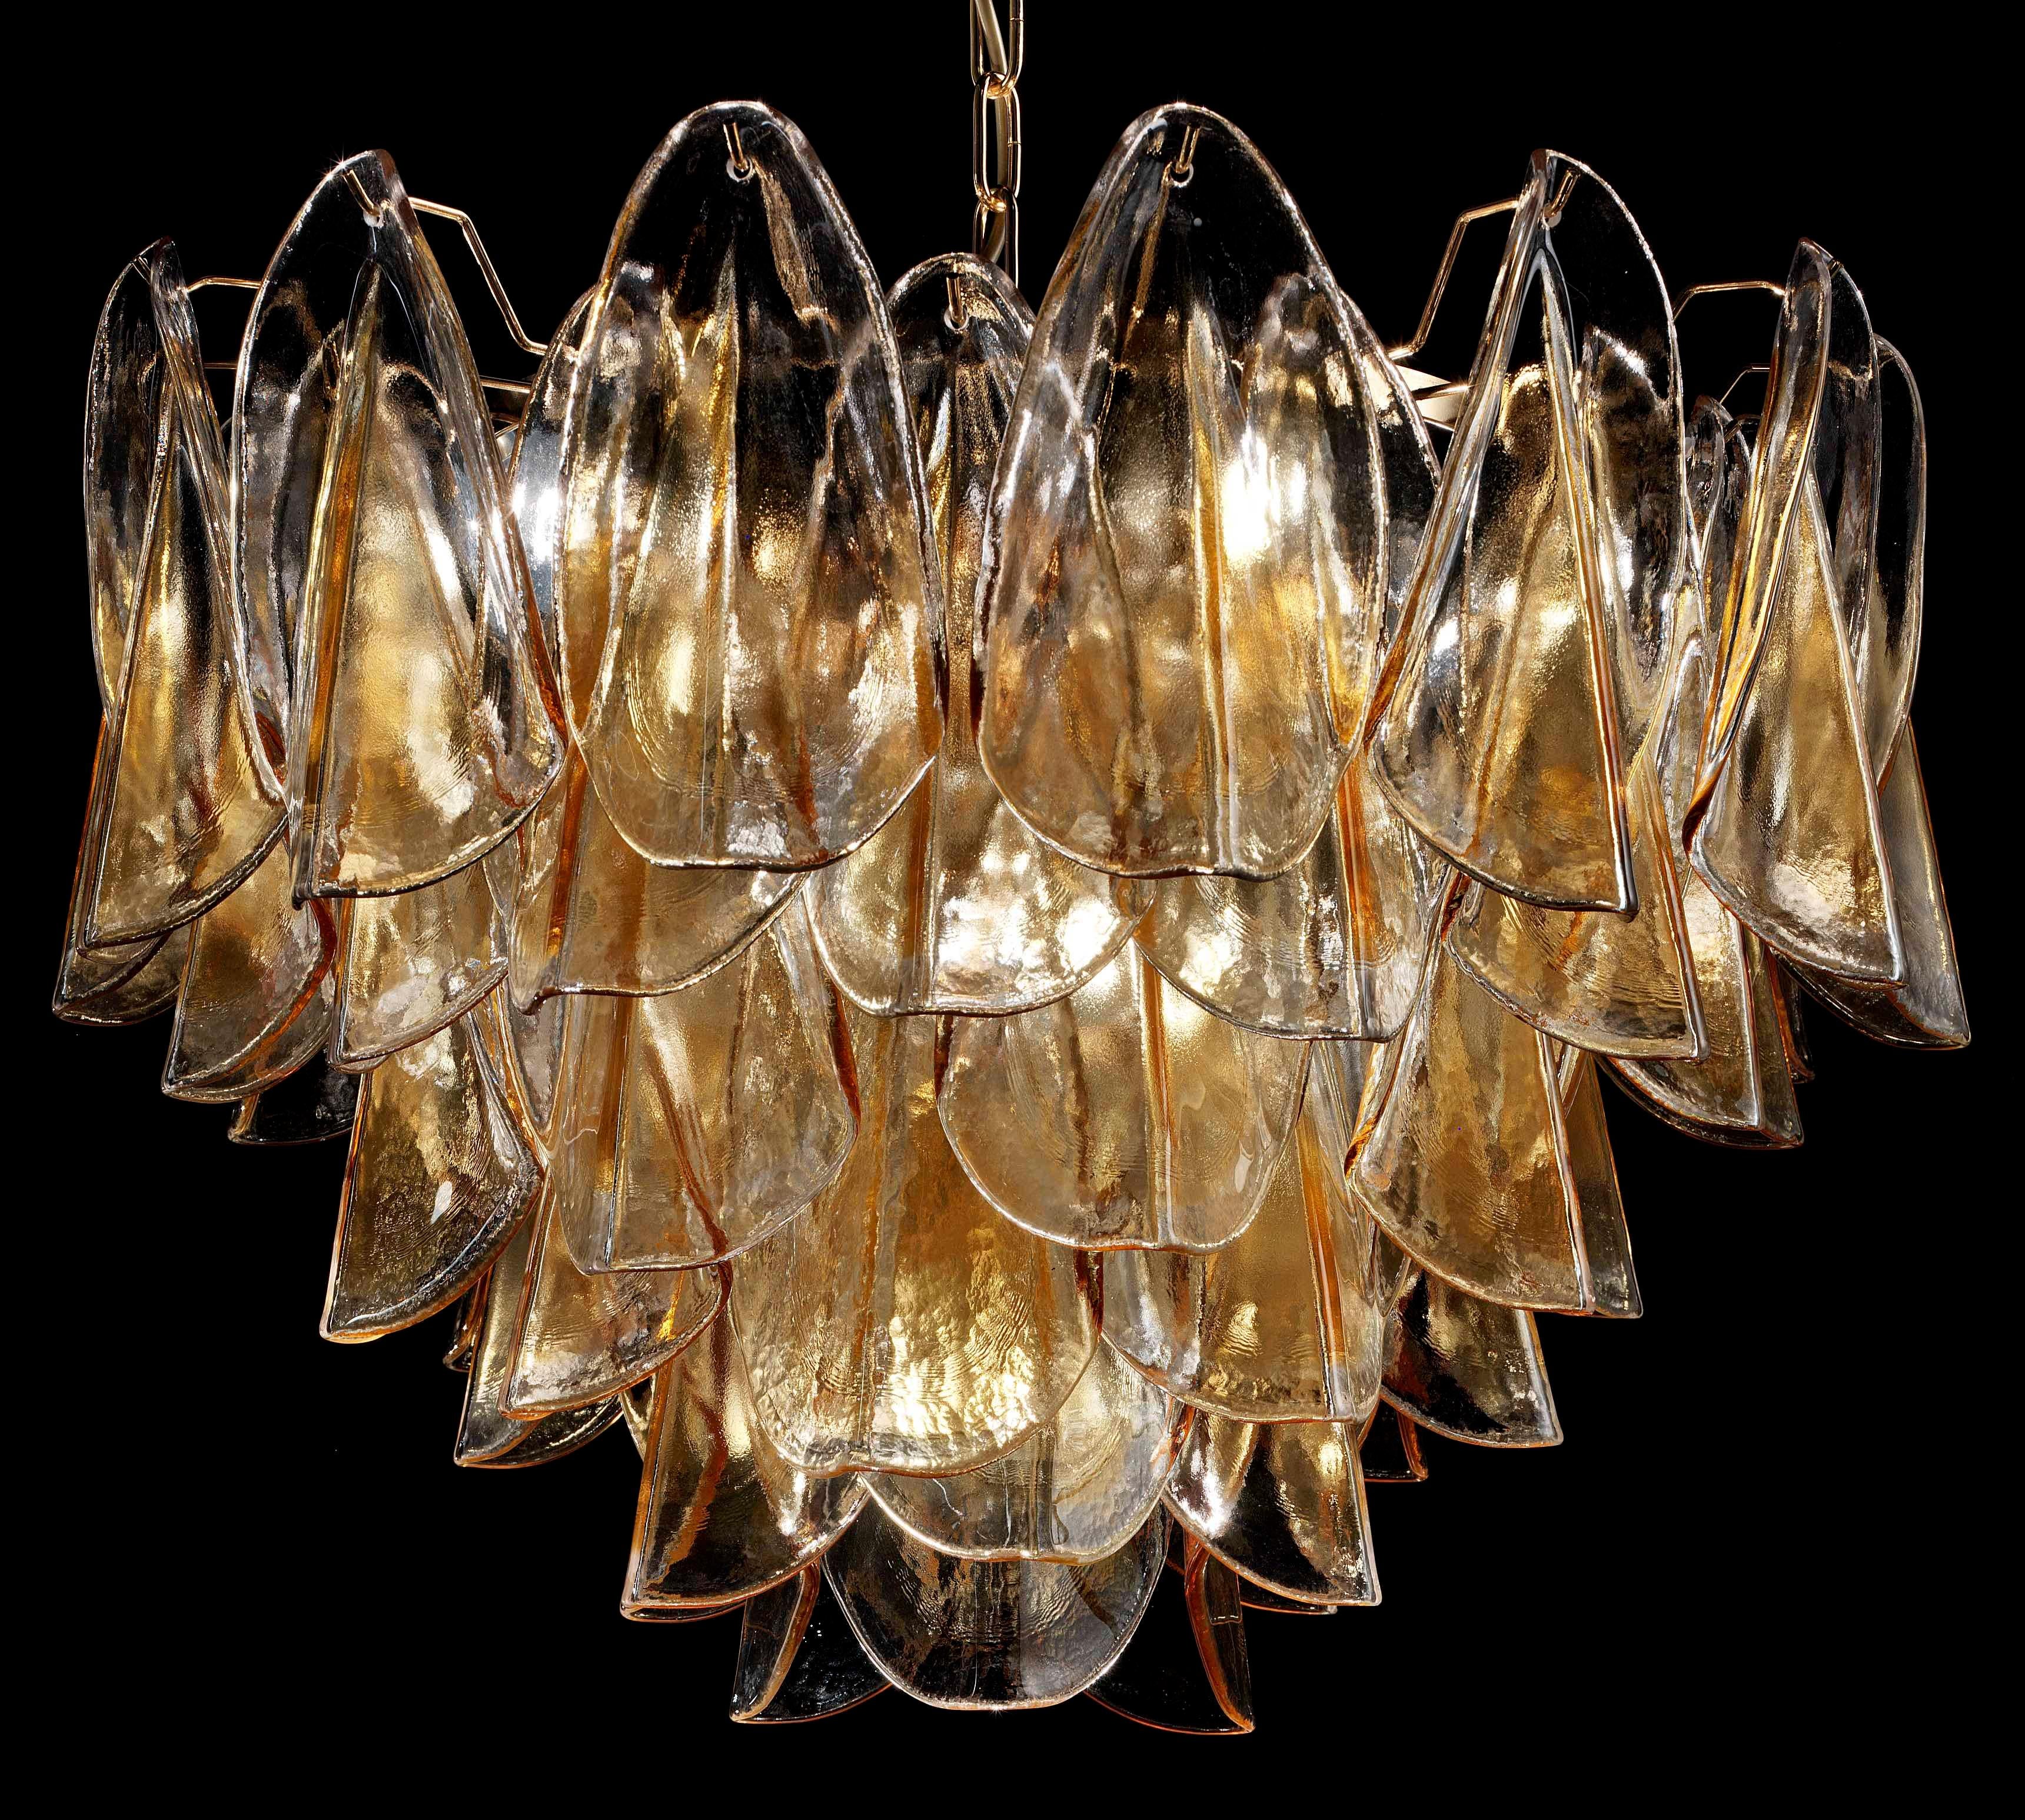 Italian chandelier shown with clear and amber Murano glass petals, mounted on 24 k gold finish metal frame / Designed by Fabio Bergomi for Fabio Ltd, inspired by Vistosi / Made in Italy
7 lights / E26 or E27 type / max 60W each
Measures: Diameter: